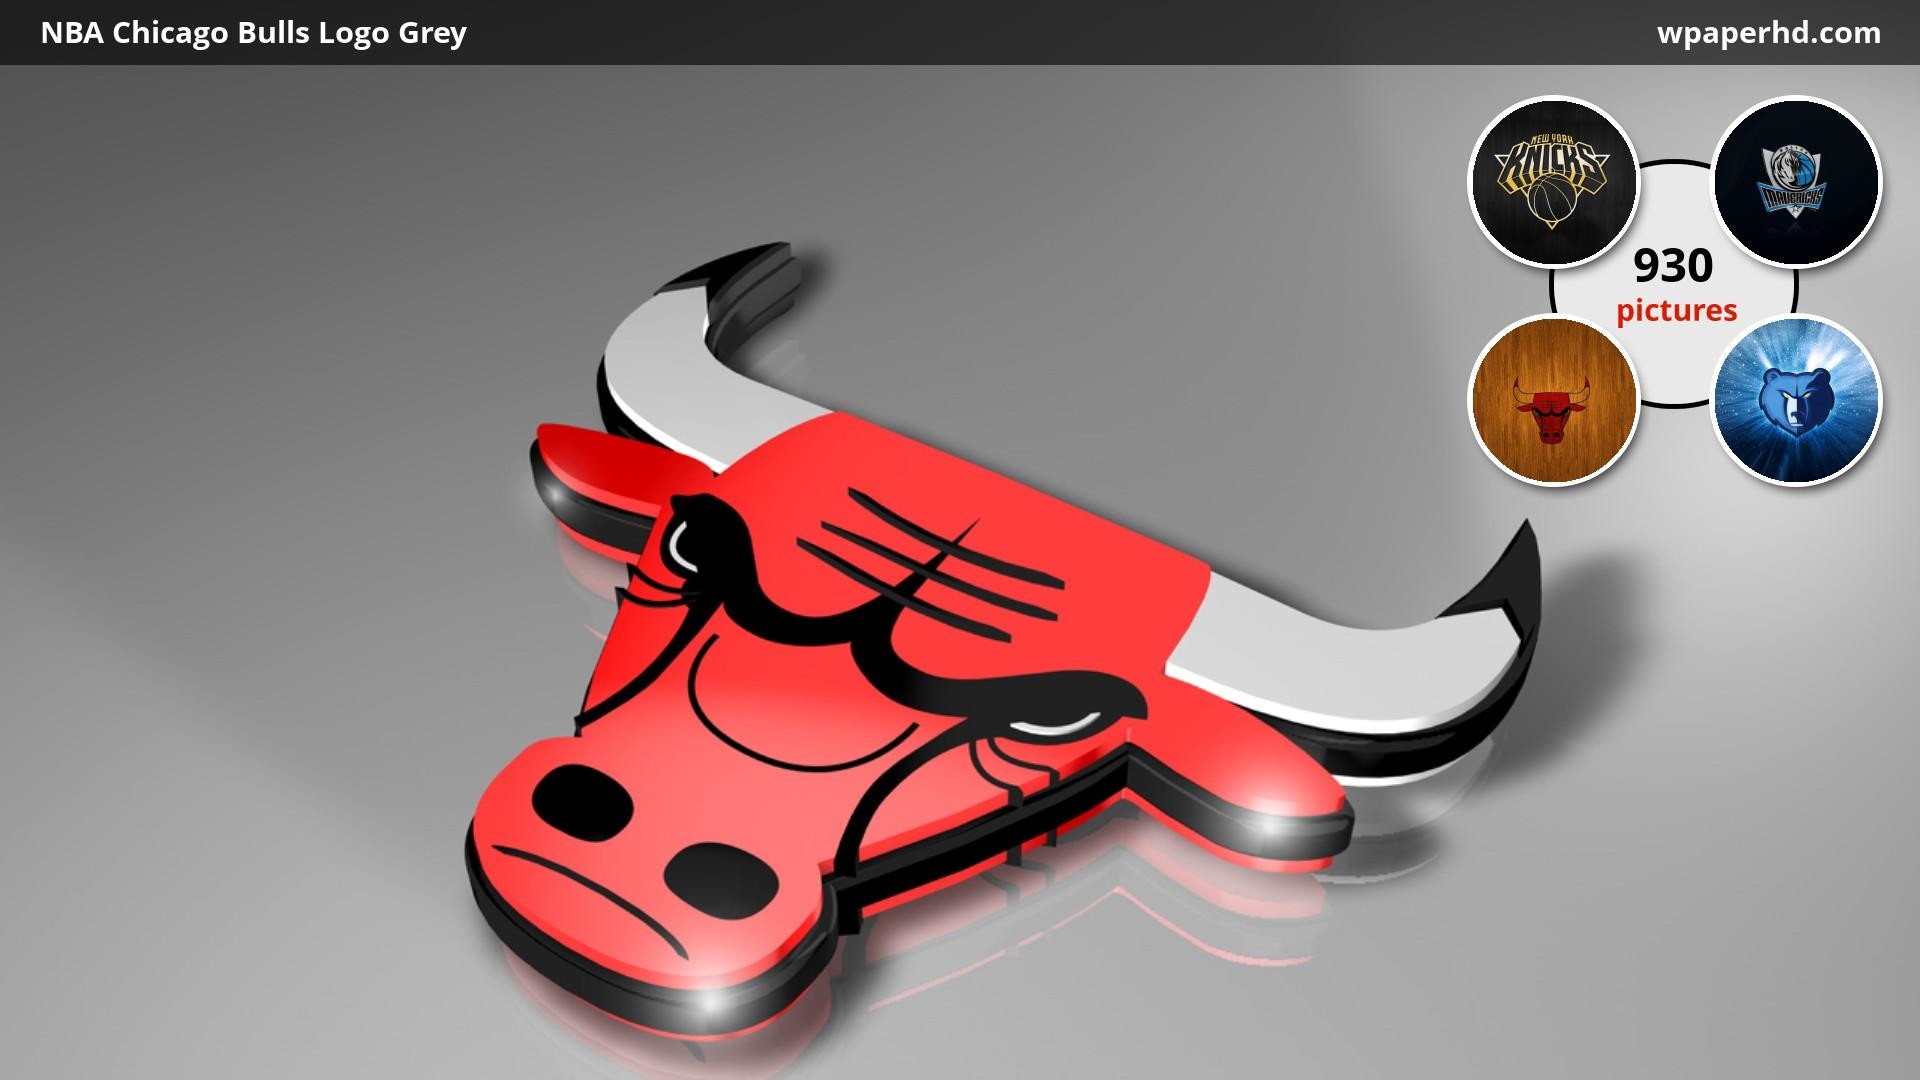 1920x1080 You are on page with NBA Chicago Bulls Logo Grey wallpaper, where you can  download this picture in Original size and ...